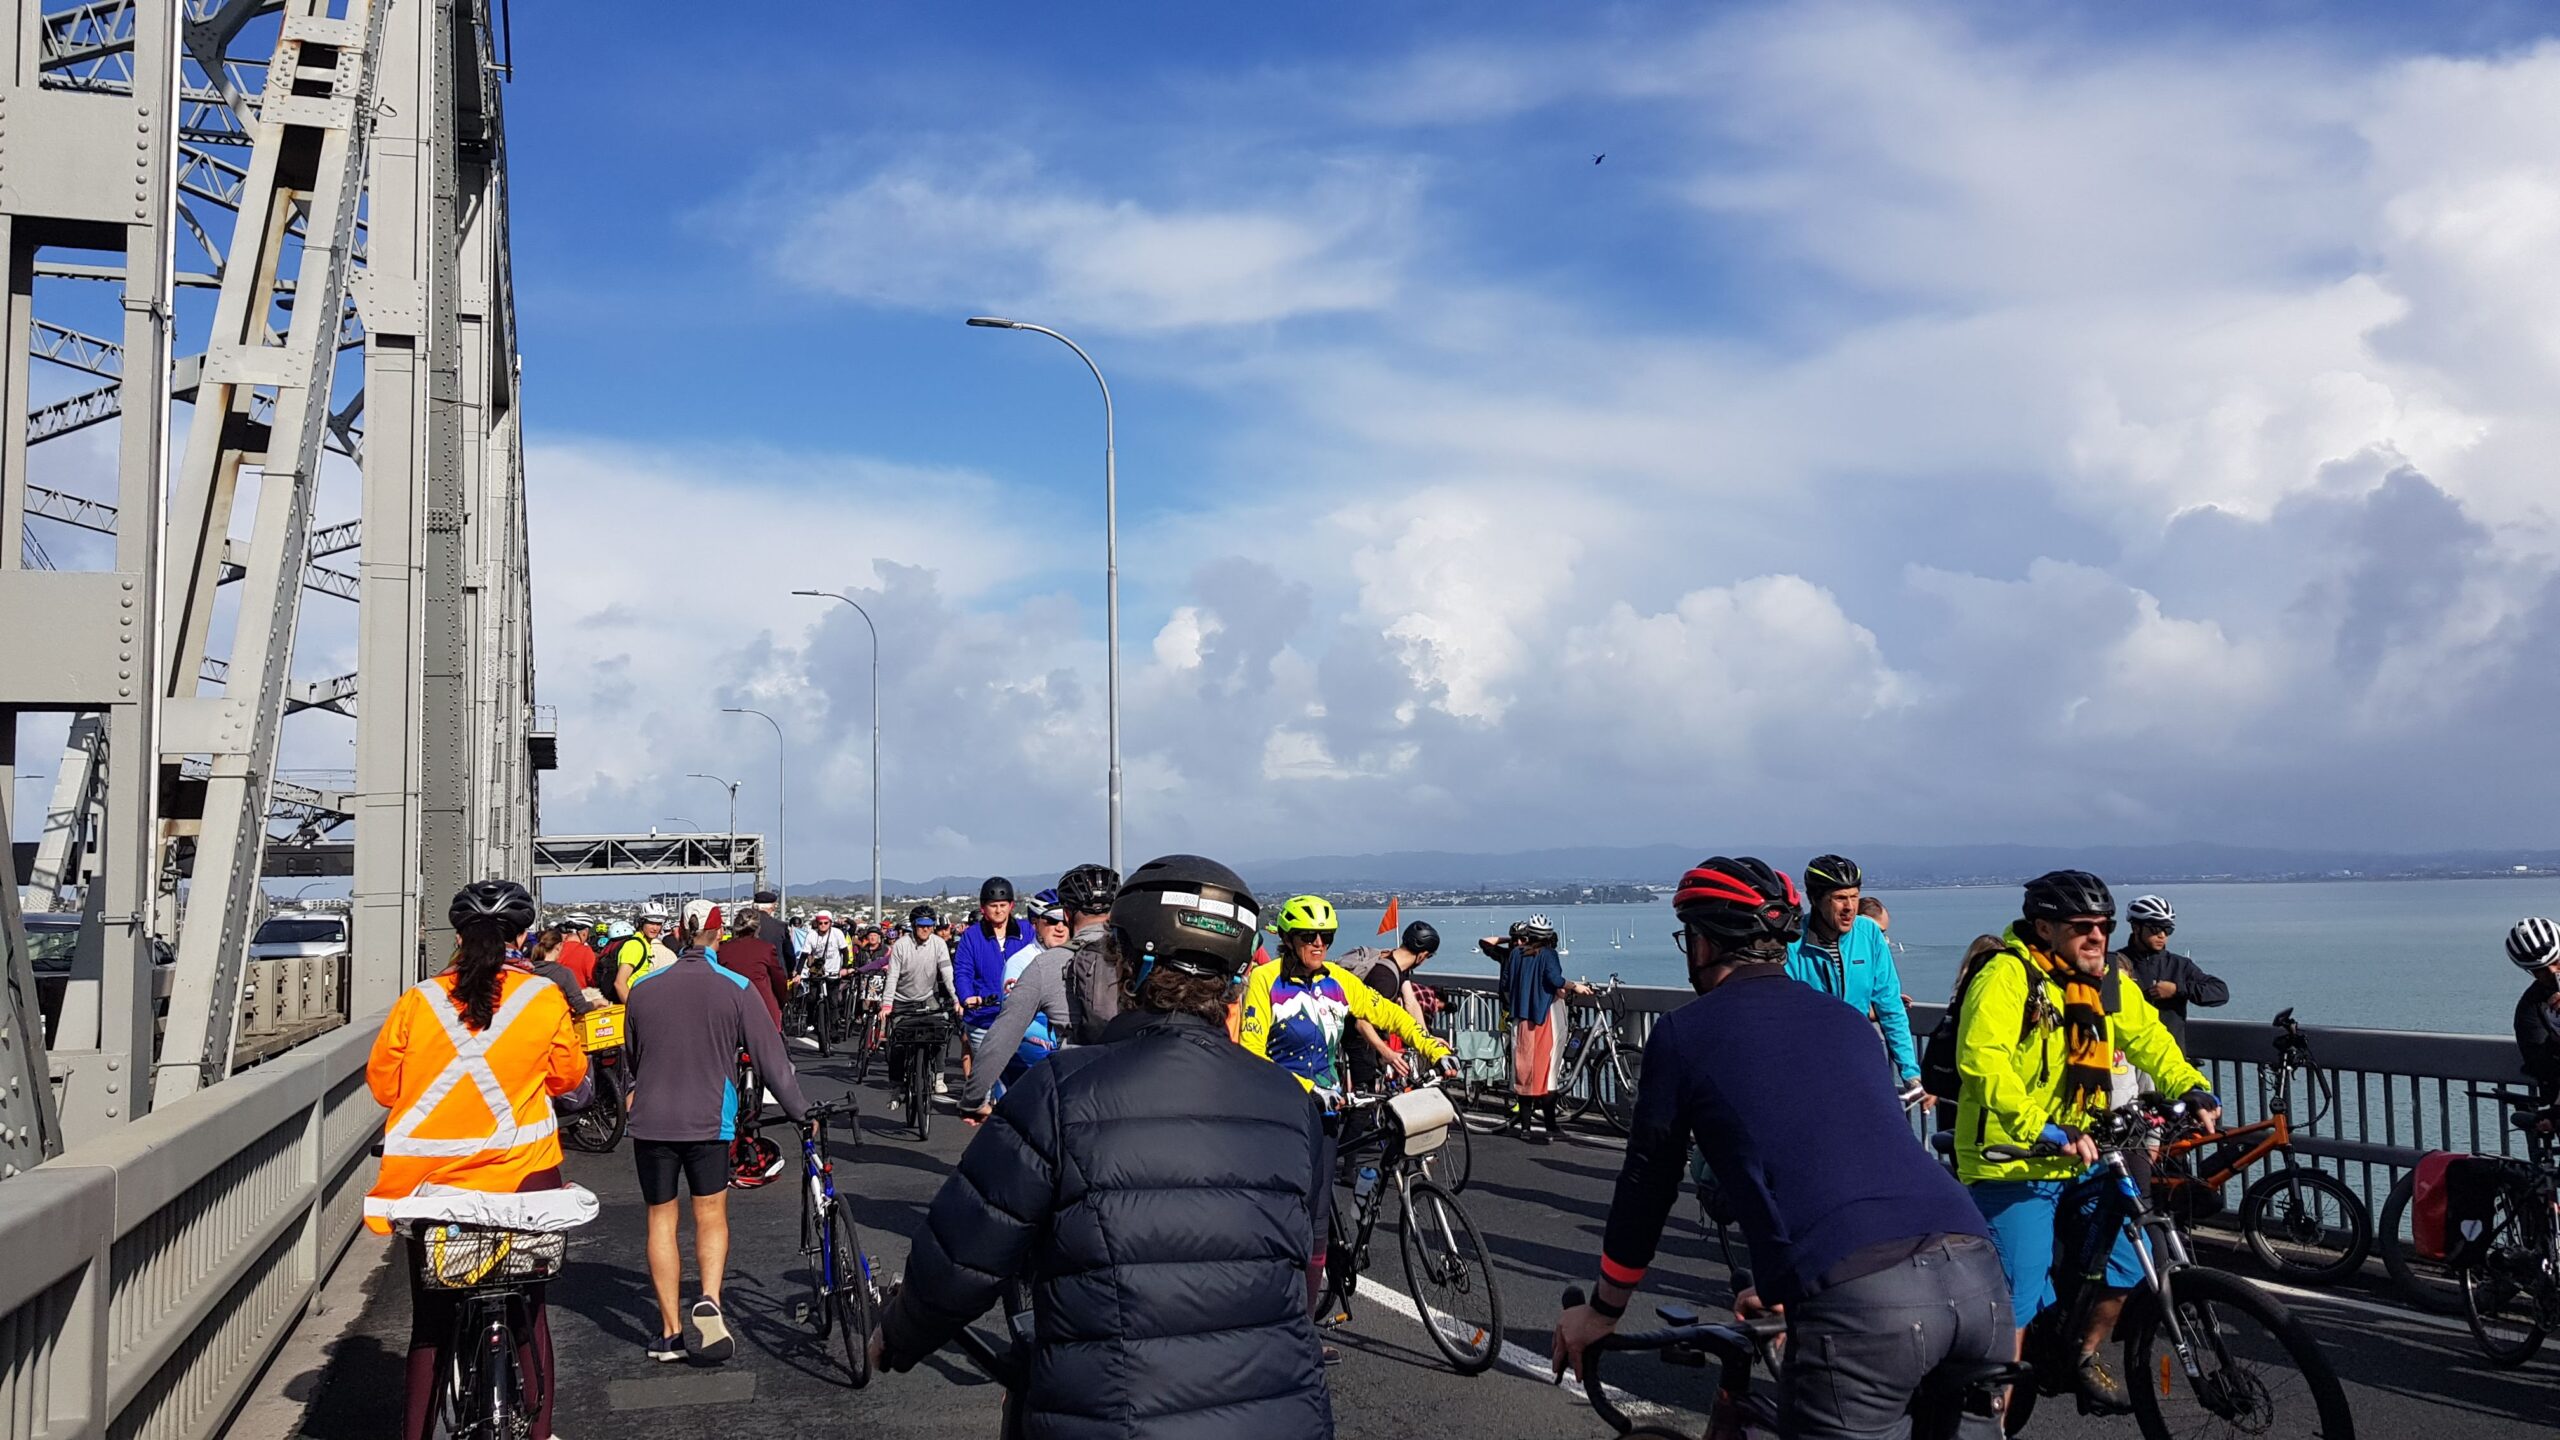 The bridge is crowded with people riding bikes over it as part of a demonstration